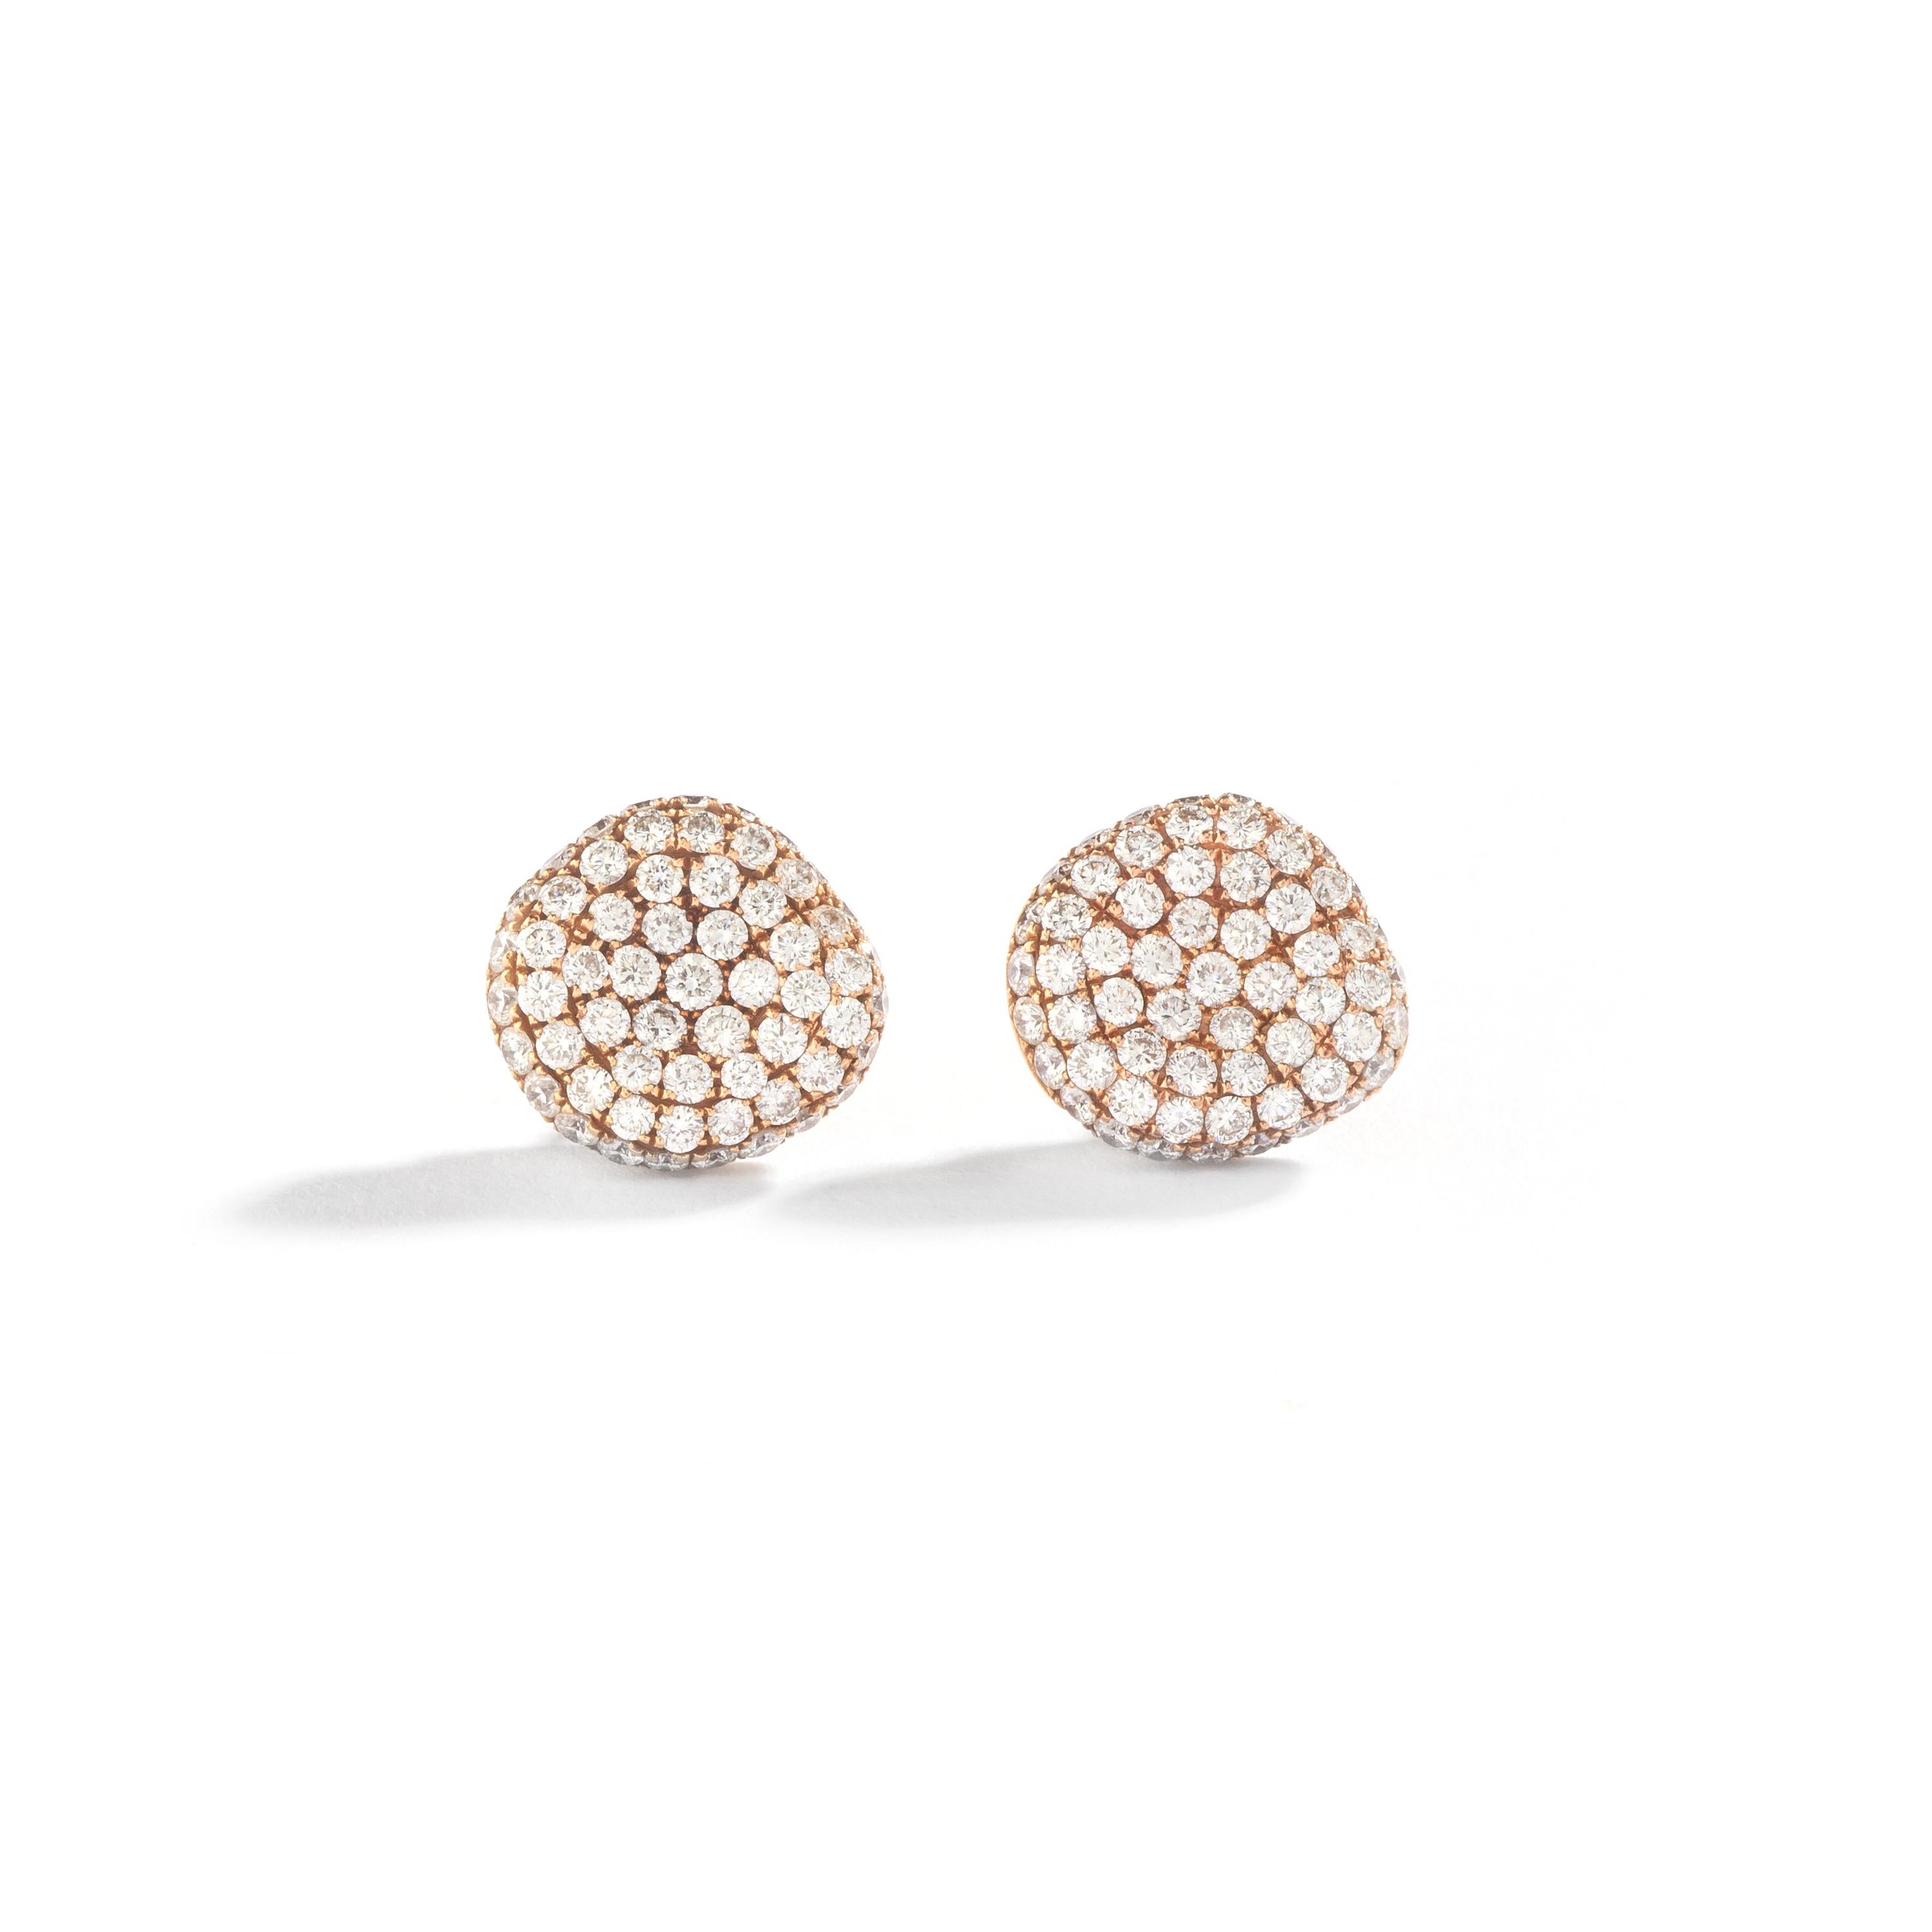 Each element is fully set by Diamond on rose gold.
Contemporary.

Total height approx. : 1.40cm.
Total width approx. : 1.30cm.
Total weight: 6.08 grams.